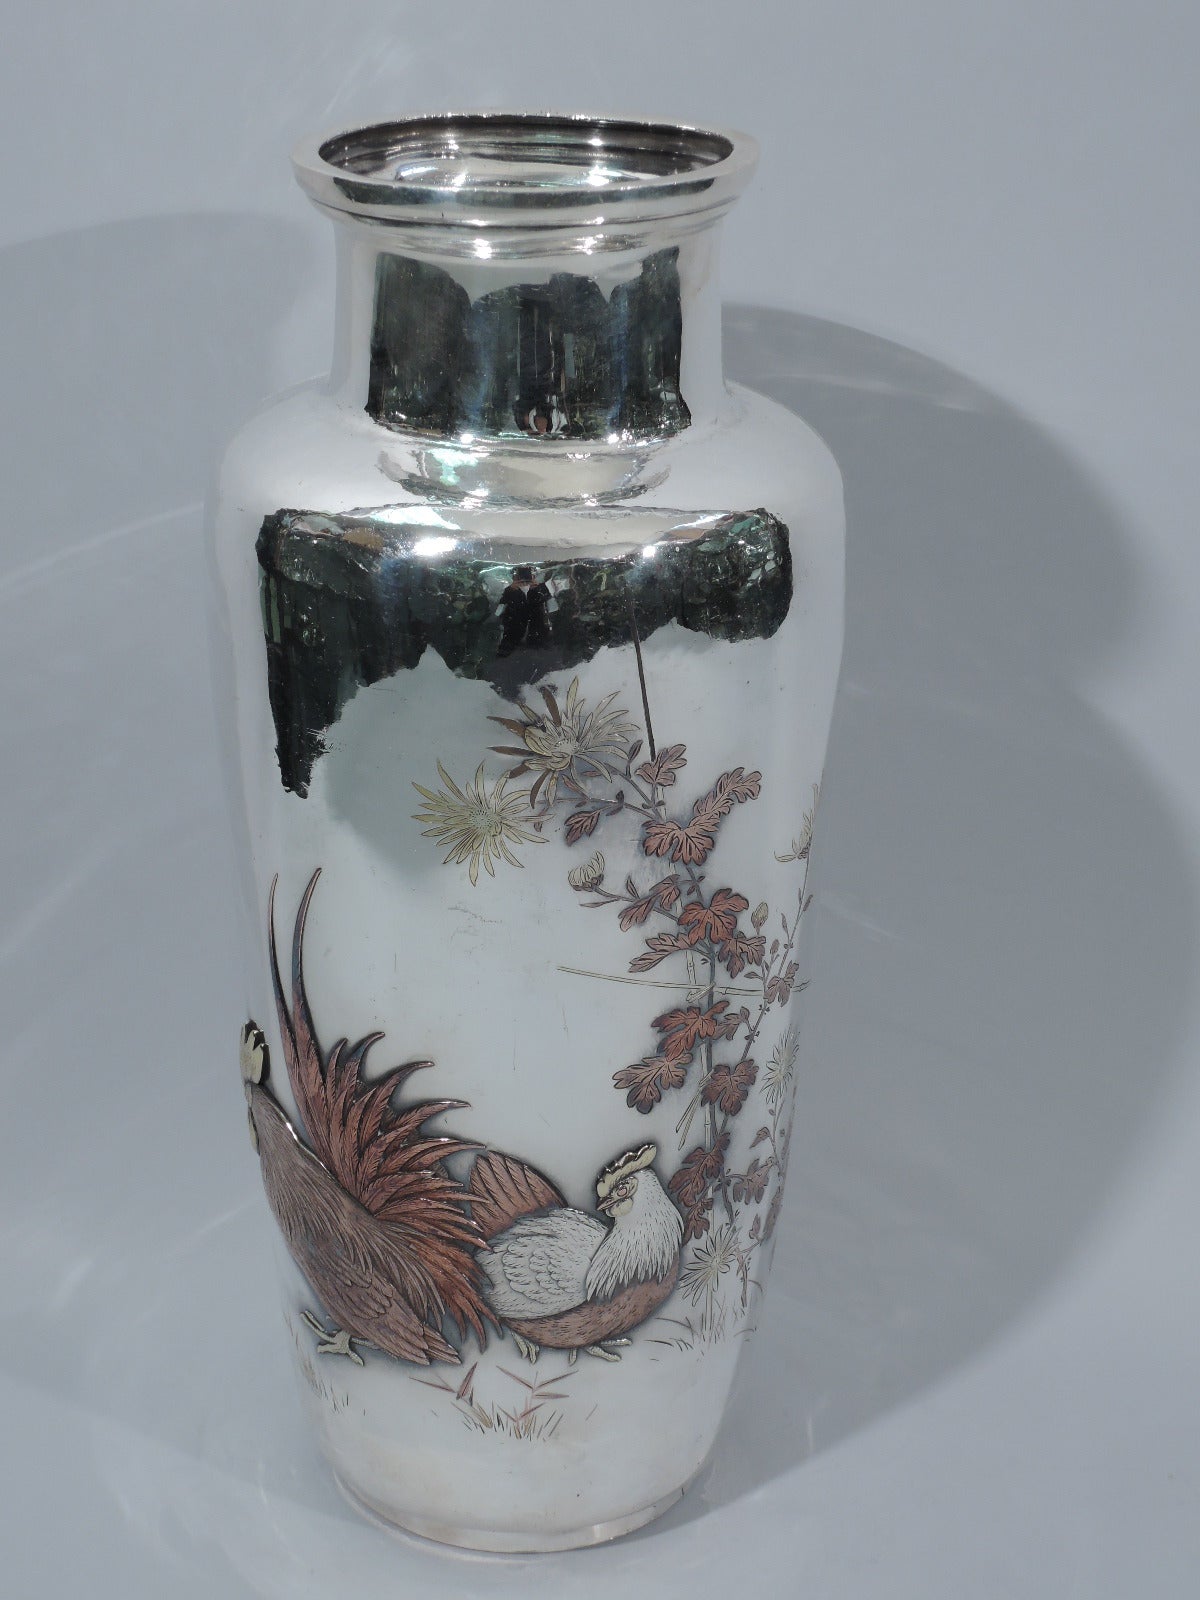 Large silver vase with mixed-metal farmyard scene. Made by Kobayashi in Tokyo. Baluster with straight and short neck, flat rim, and foot ring. Applied to body: a rooster and hen warily face-down an advancing chick. Inlaid bamboo, flowers, and grass.